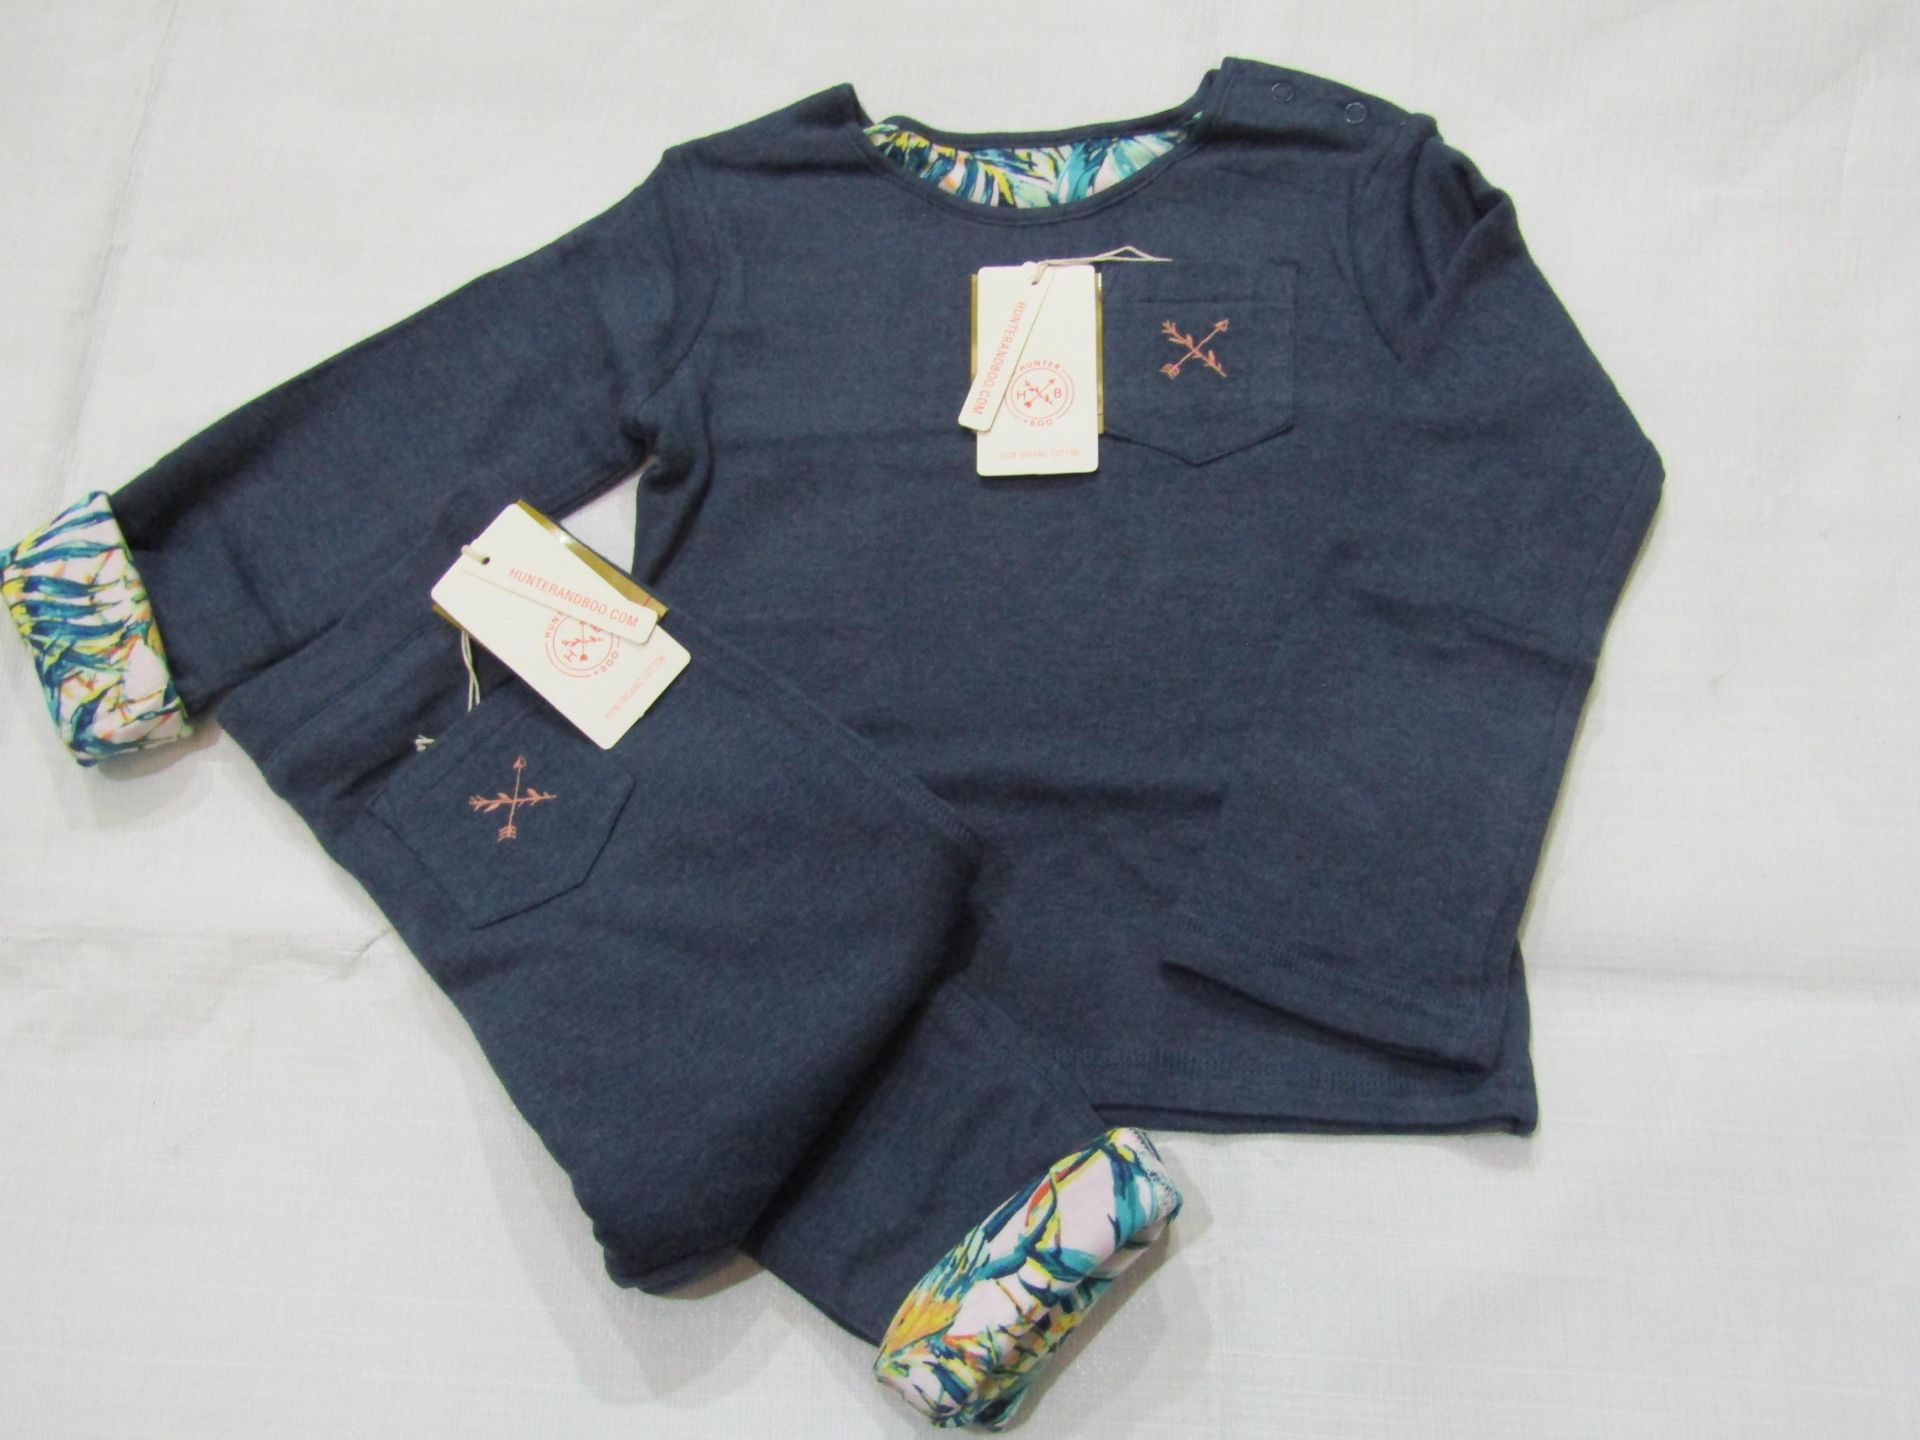 Hunter & Boo Reversible Sweater & Leggings Palawan/Navy Aged 4-5 yrs New & Packaged RRP Sweater £